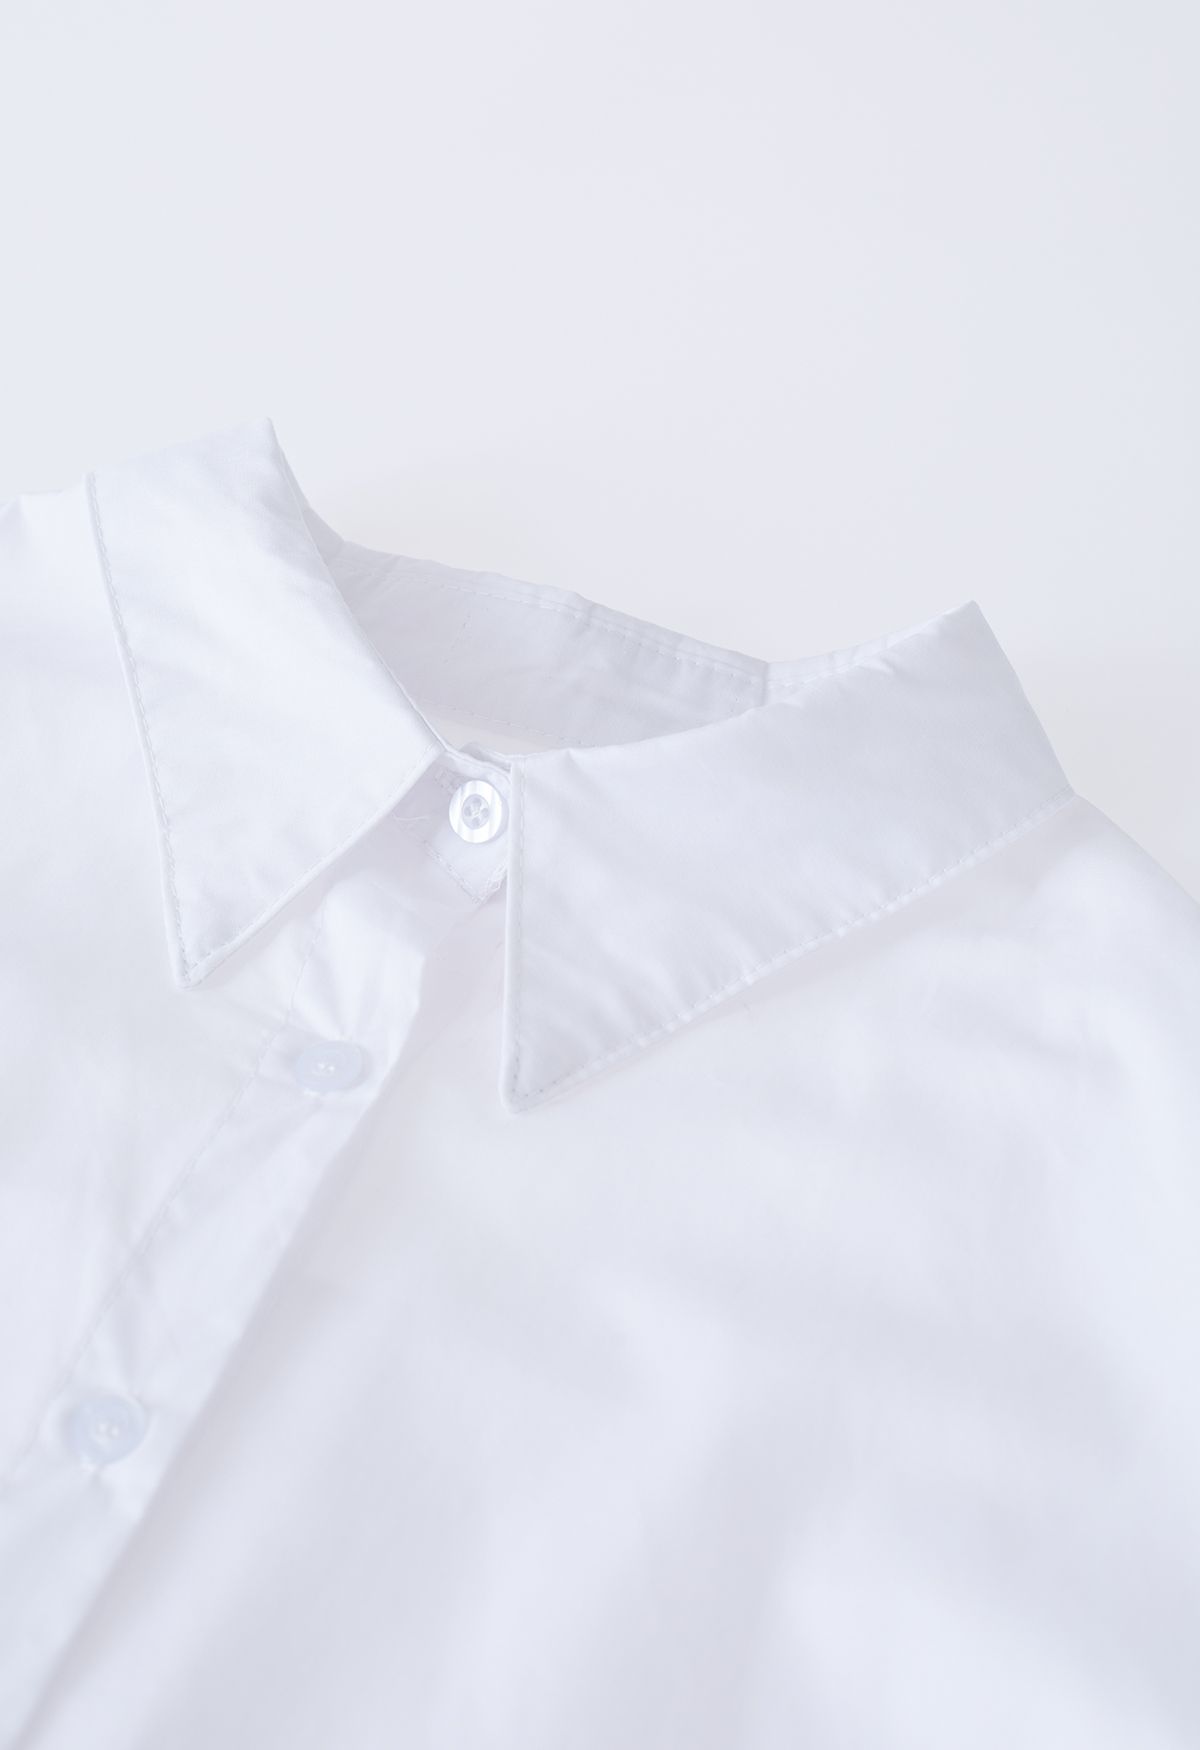 Pointed Collar Button Down Cotton Shirt in White